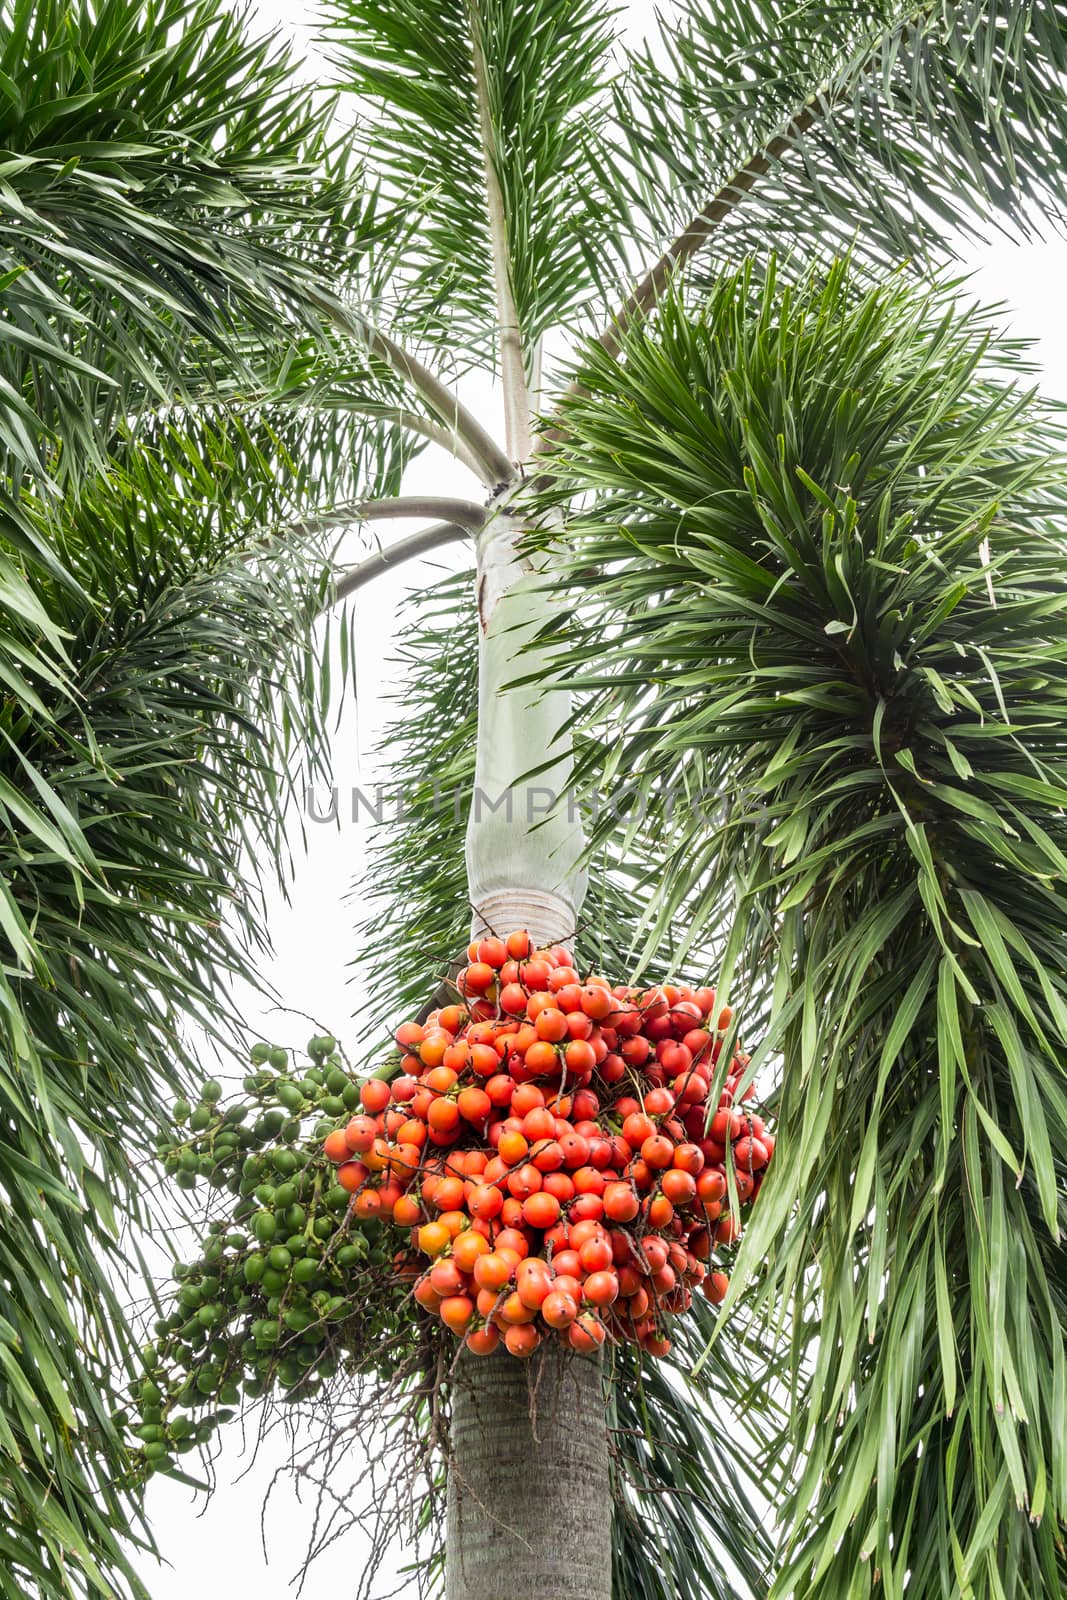 Areca catechu (Areca nut palm, Betel Nuts) All bunch into large by Gamjai